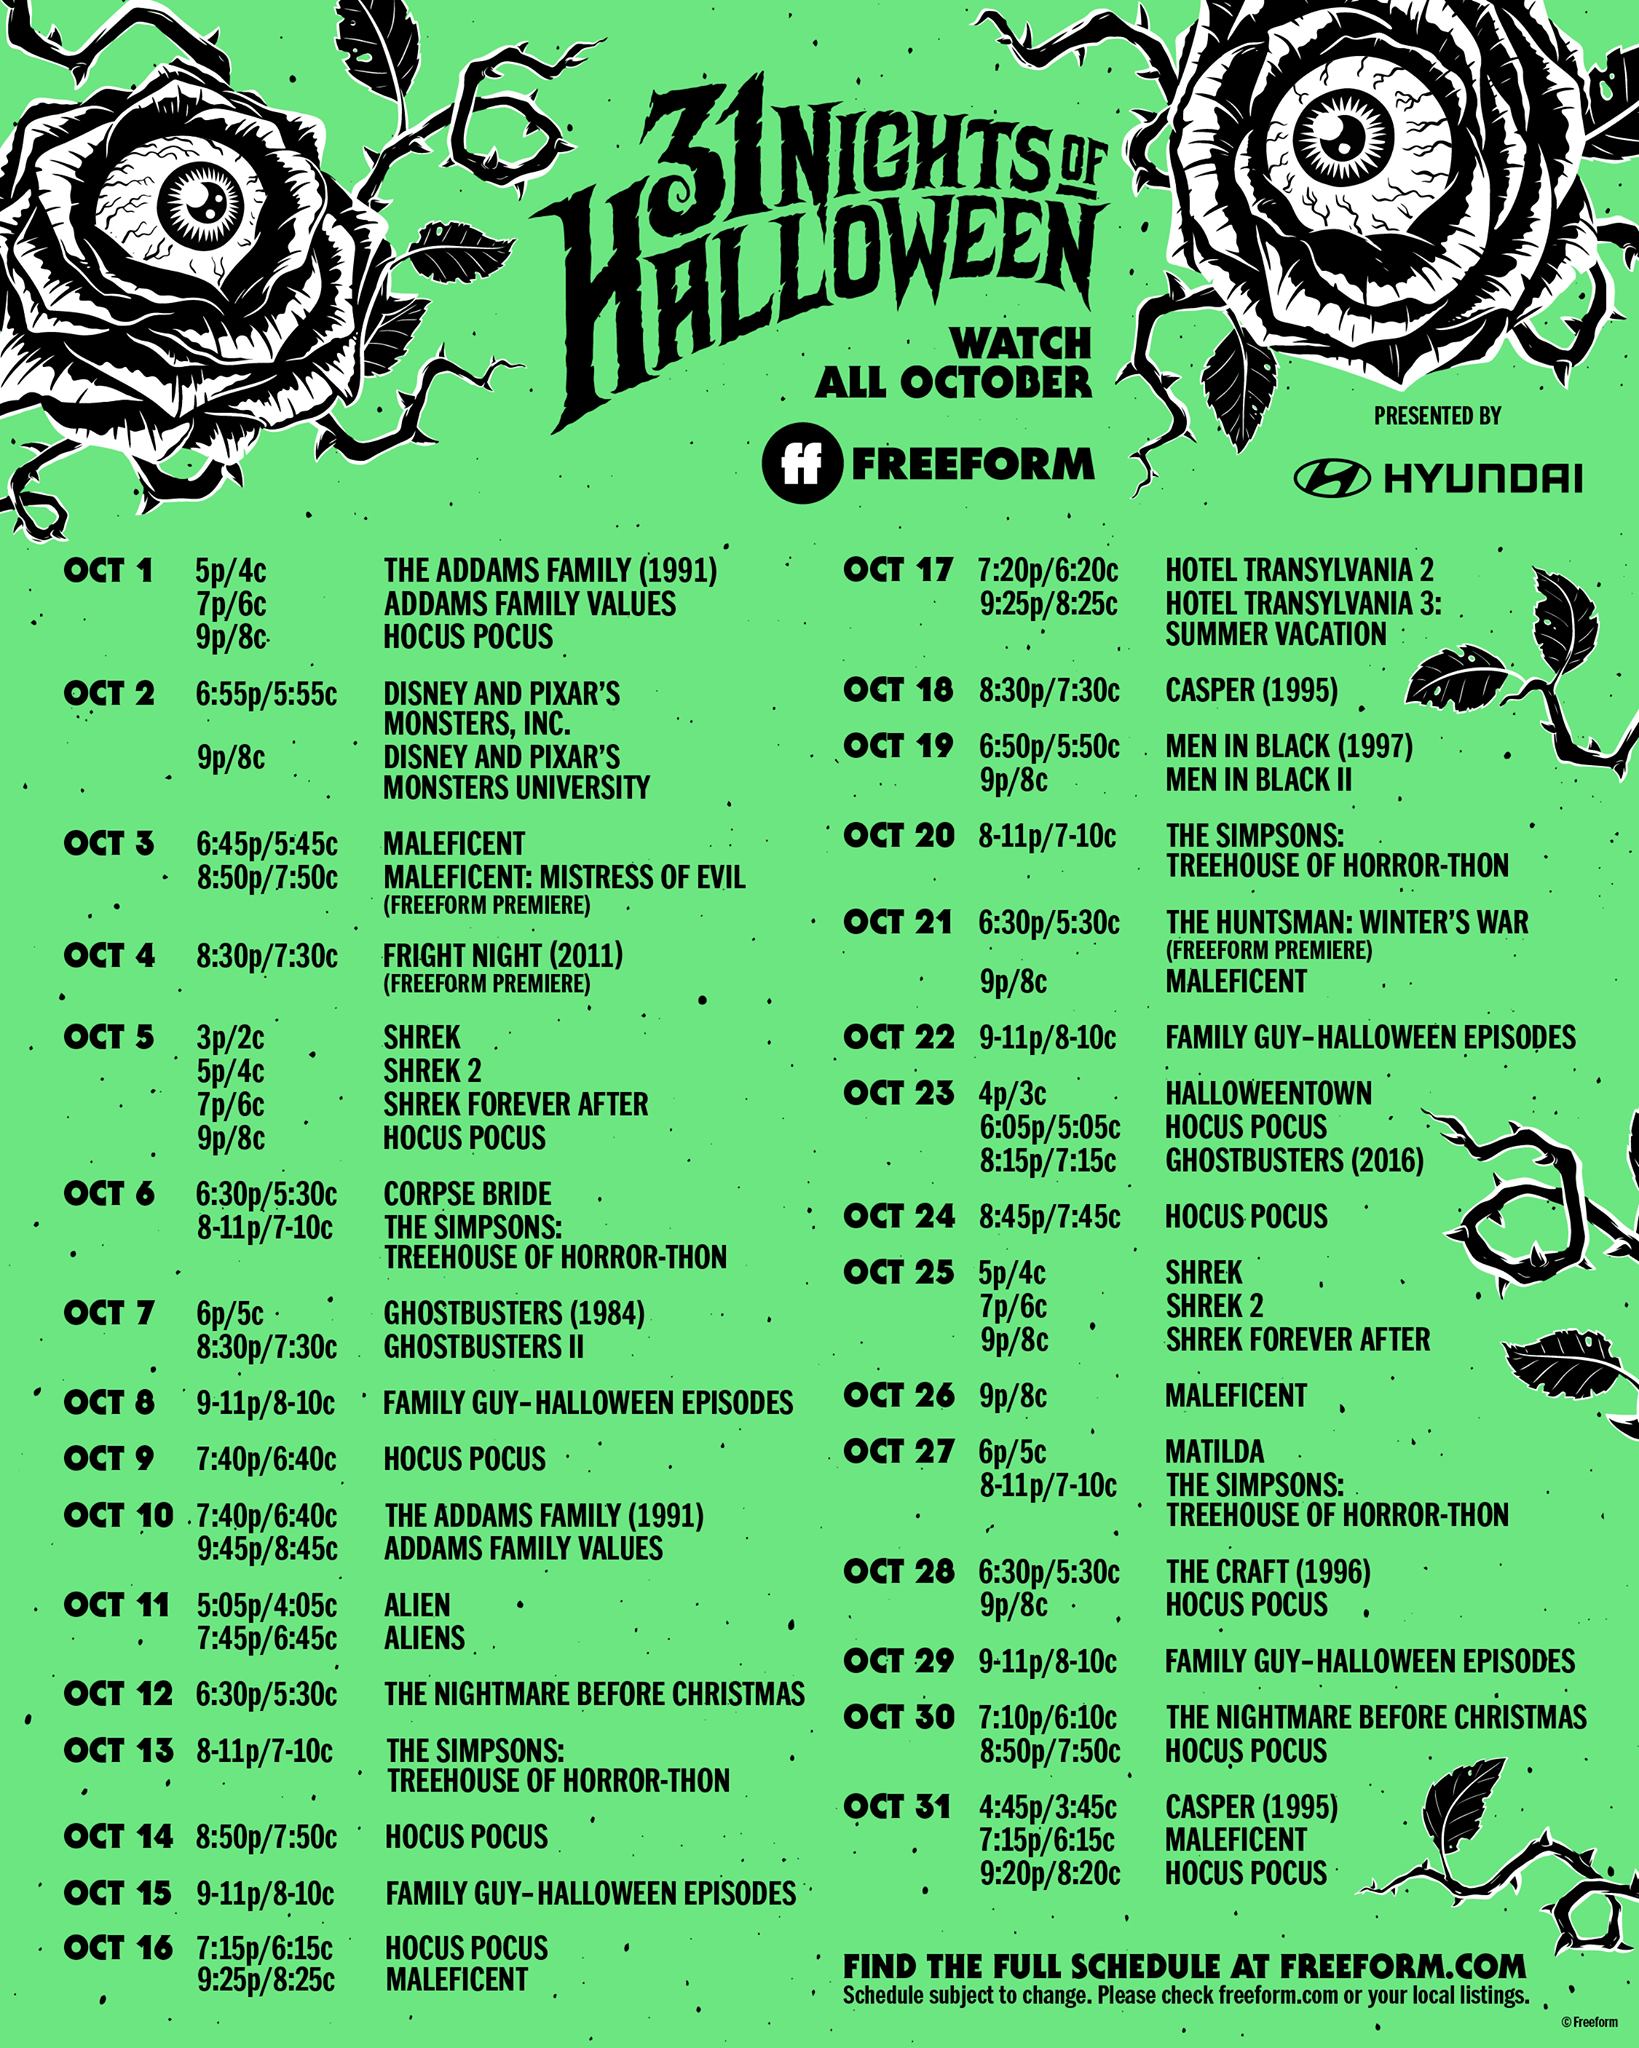 '31 Nights of Halloween' Full Schedule Announced for October 2021 | Chip and Company